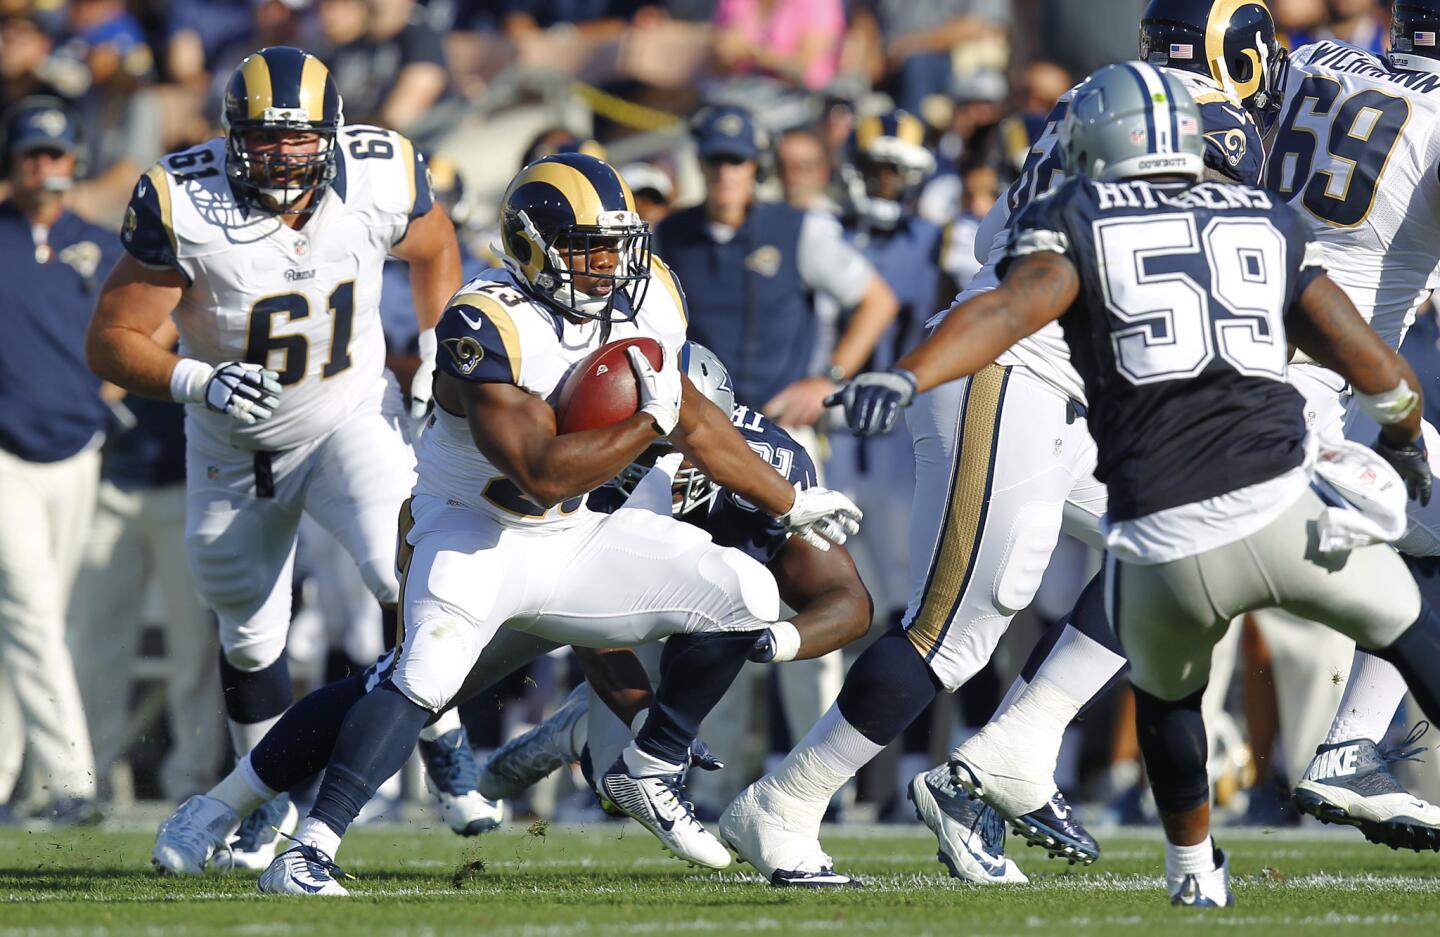 Rams running back Benny Cunningham tries to find a lane in the first quarter of a preseason game against Dallas.